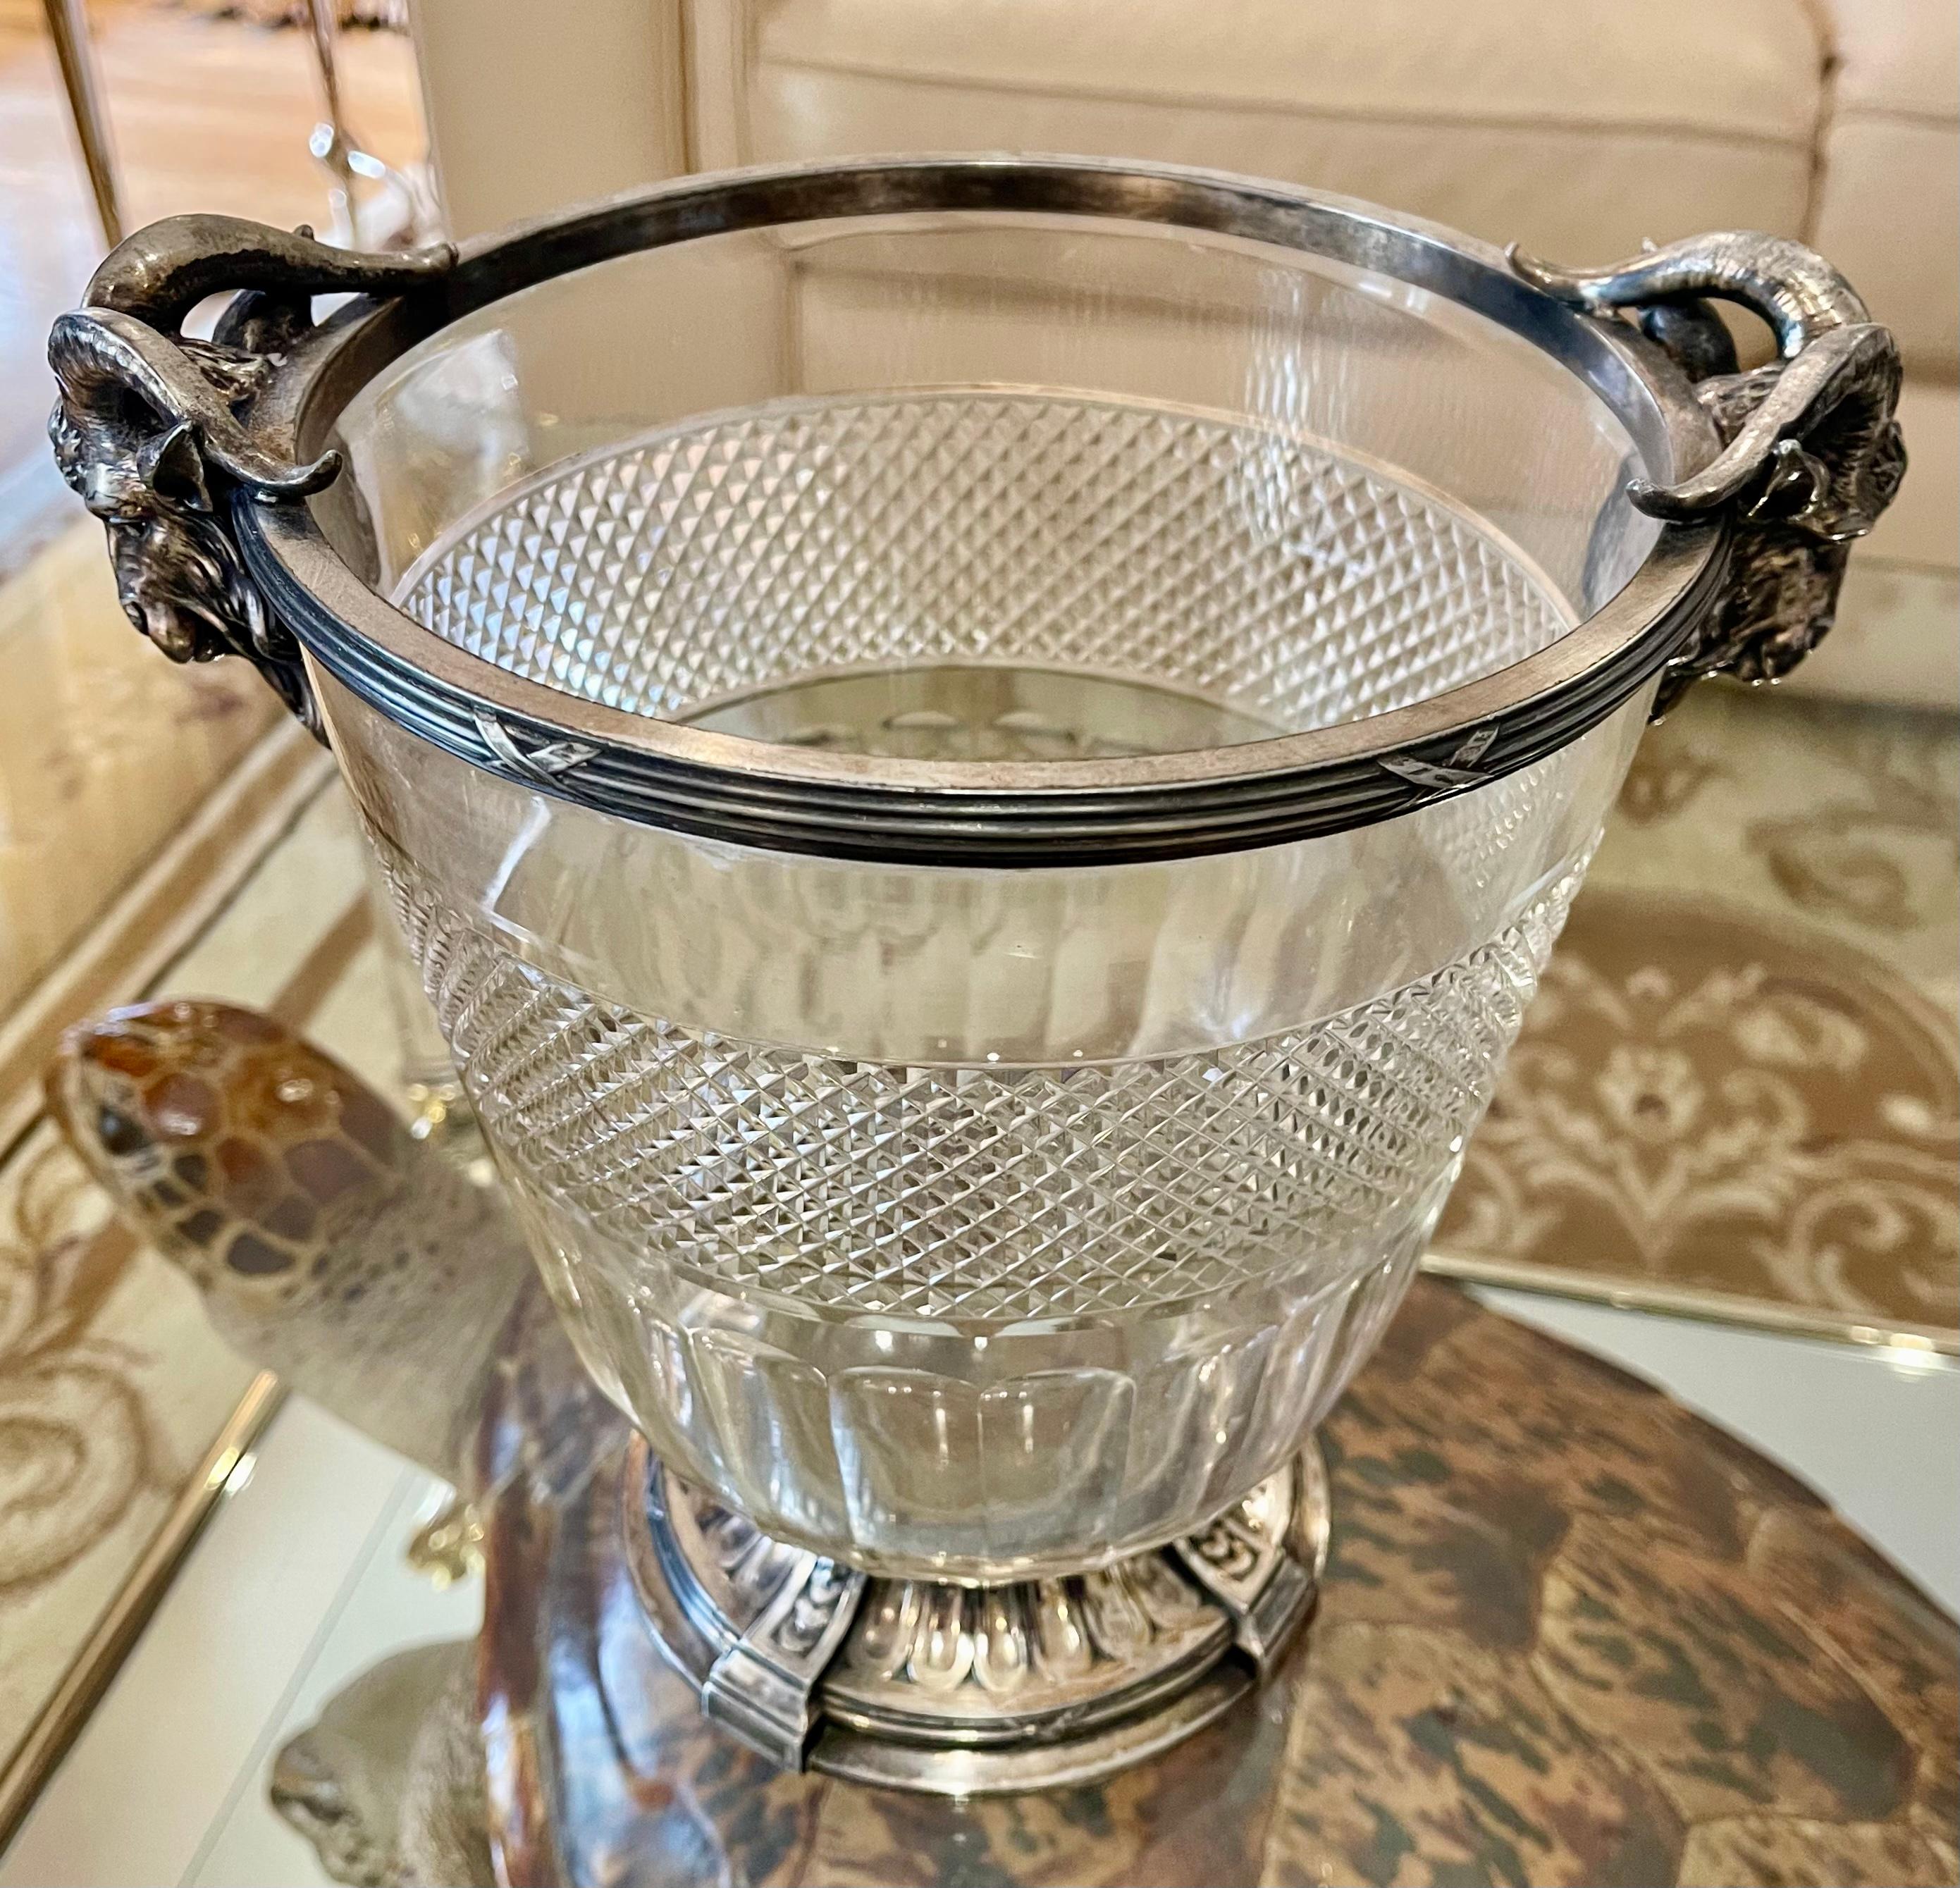 Crystal champagne bucket with silver metal frame. Two rams' heads are flanked on either side serving as handles. Very beautiful piece in good condition.

Dimensions
Height 25.5cm
Diameter 20.5cm